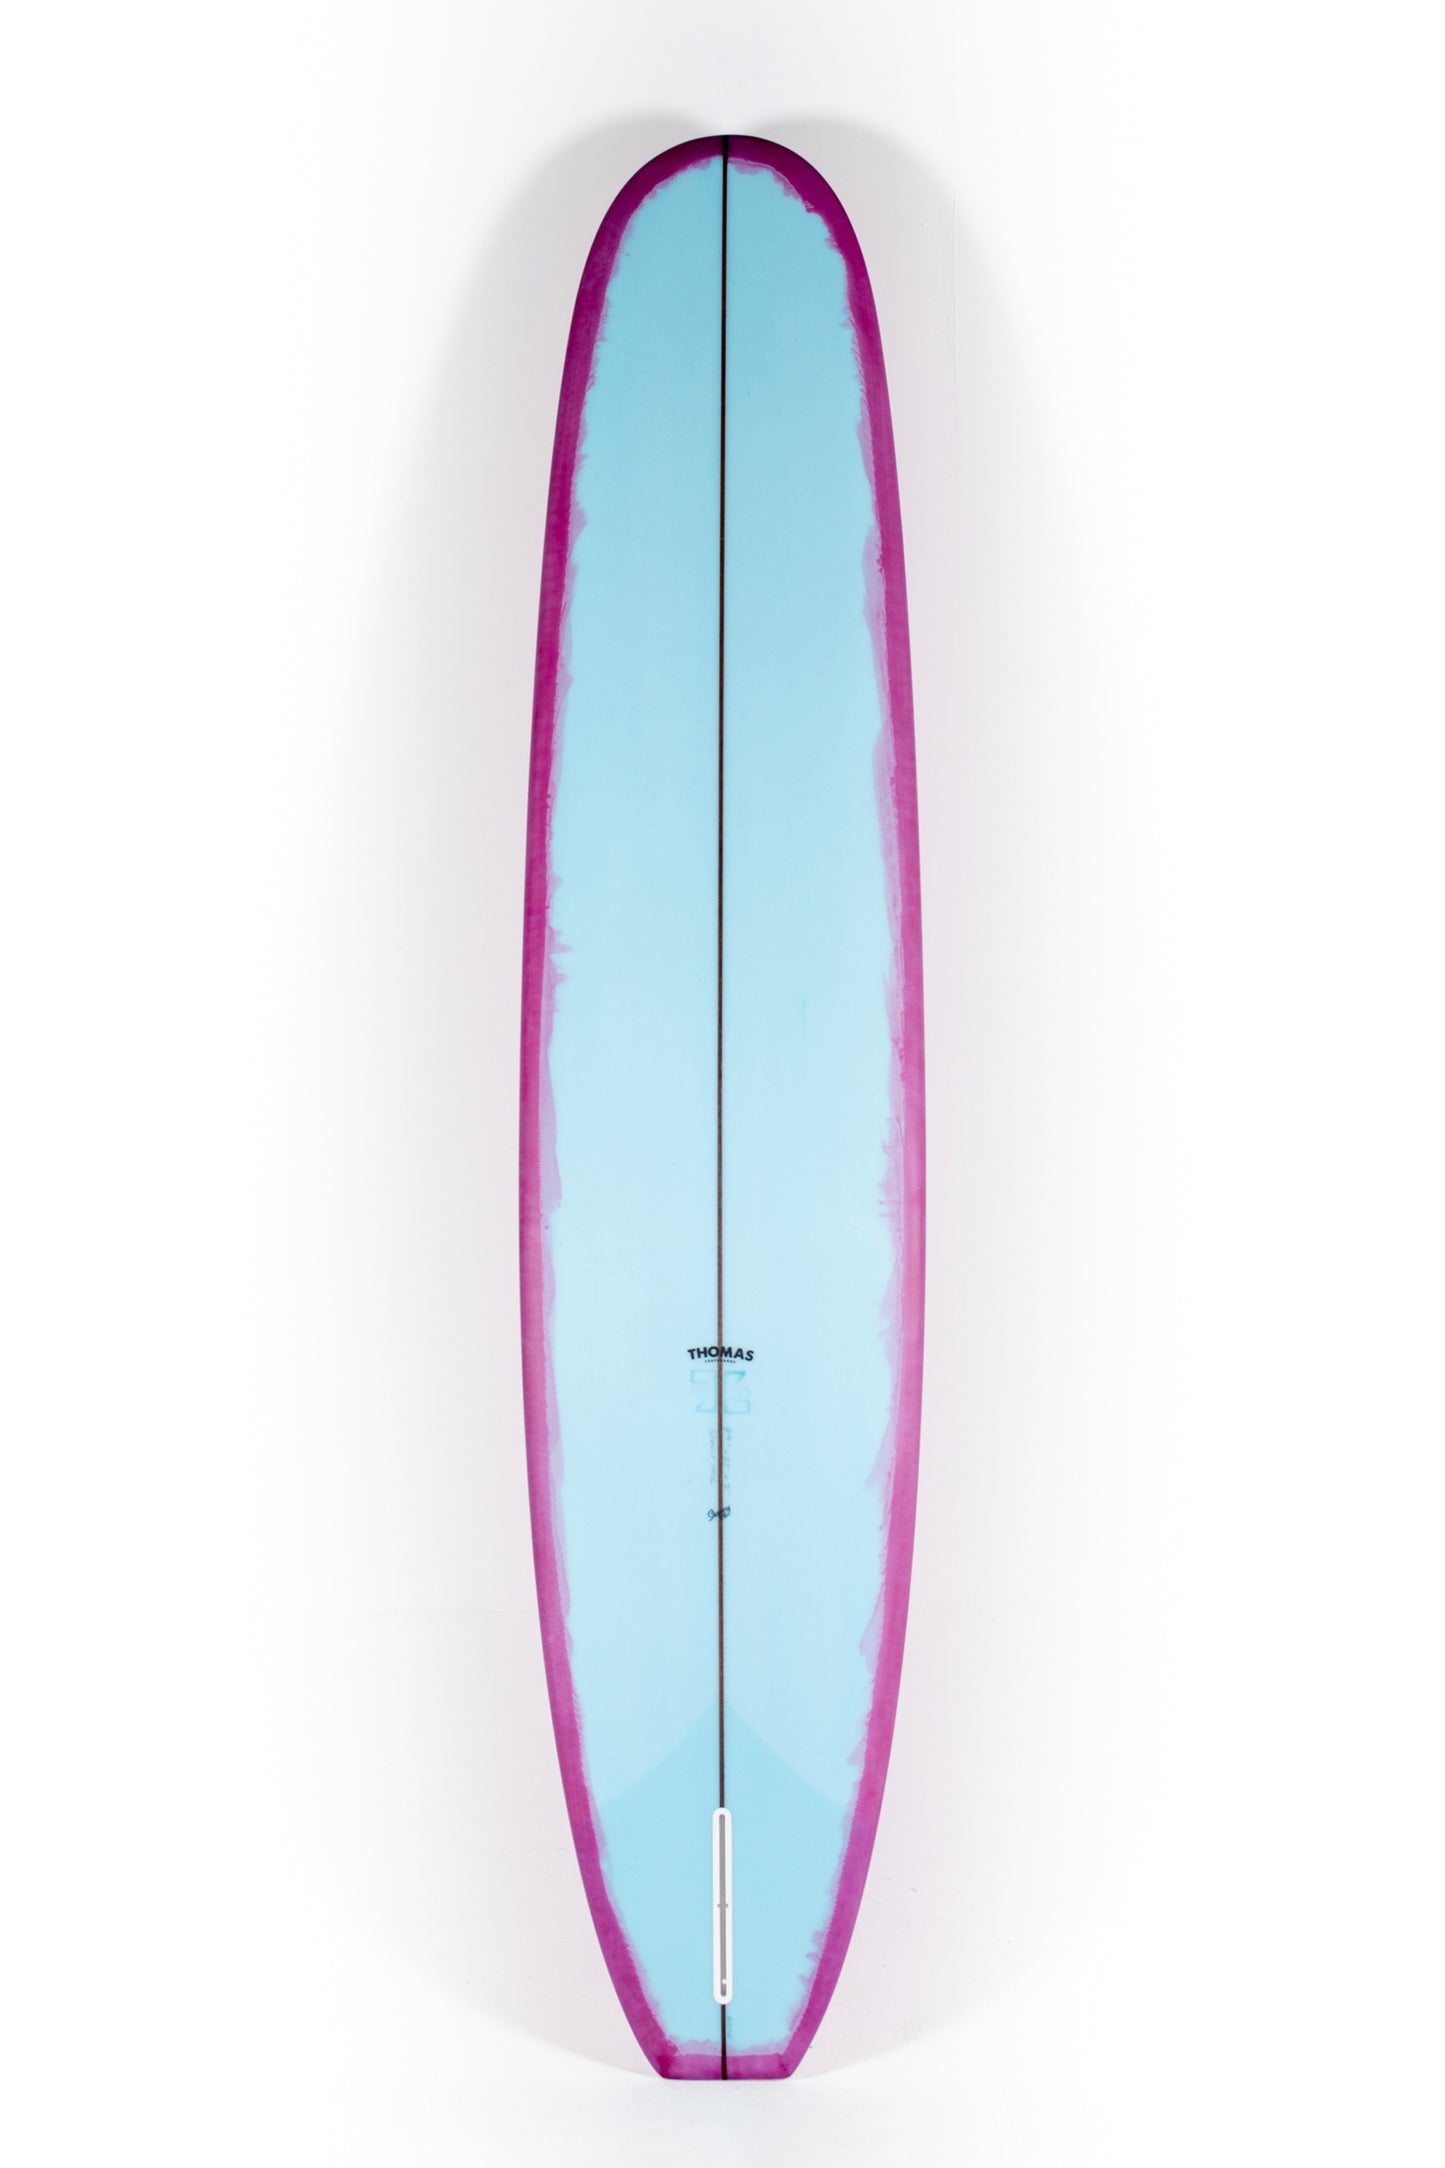 Pukas Surf Shop_Thomas Surfboards - SCOOP TAIL NOSERIDER - 9'4" x 22 15/16 x 2 15 /16 x 72.3L - SCOOP94